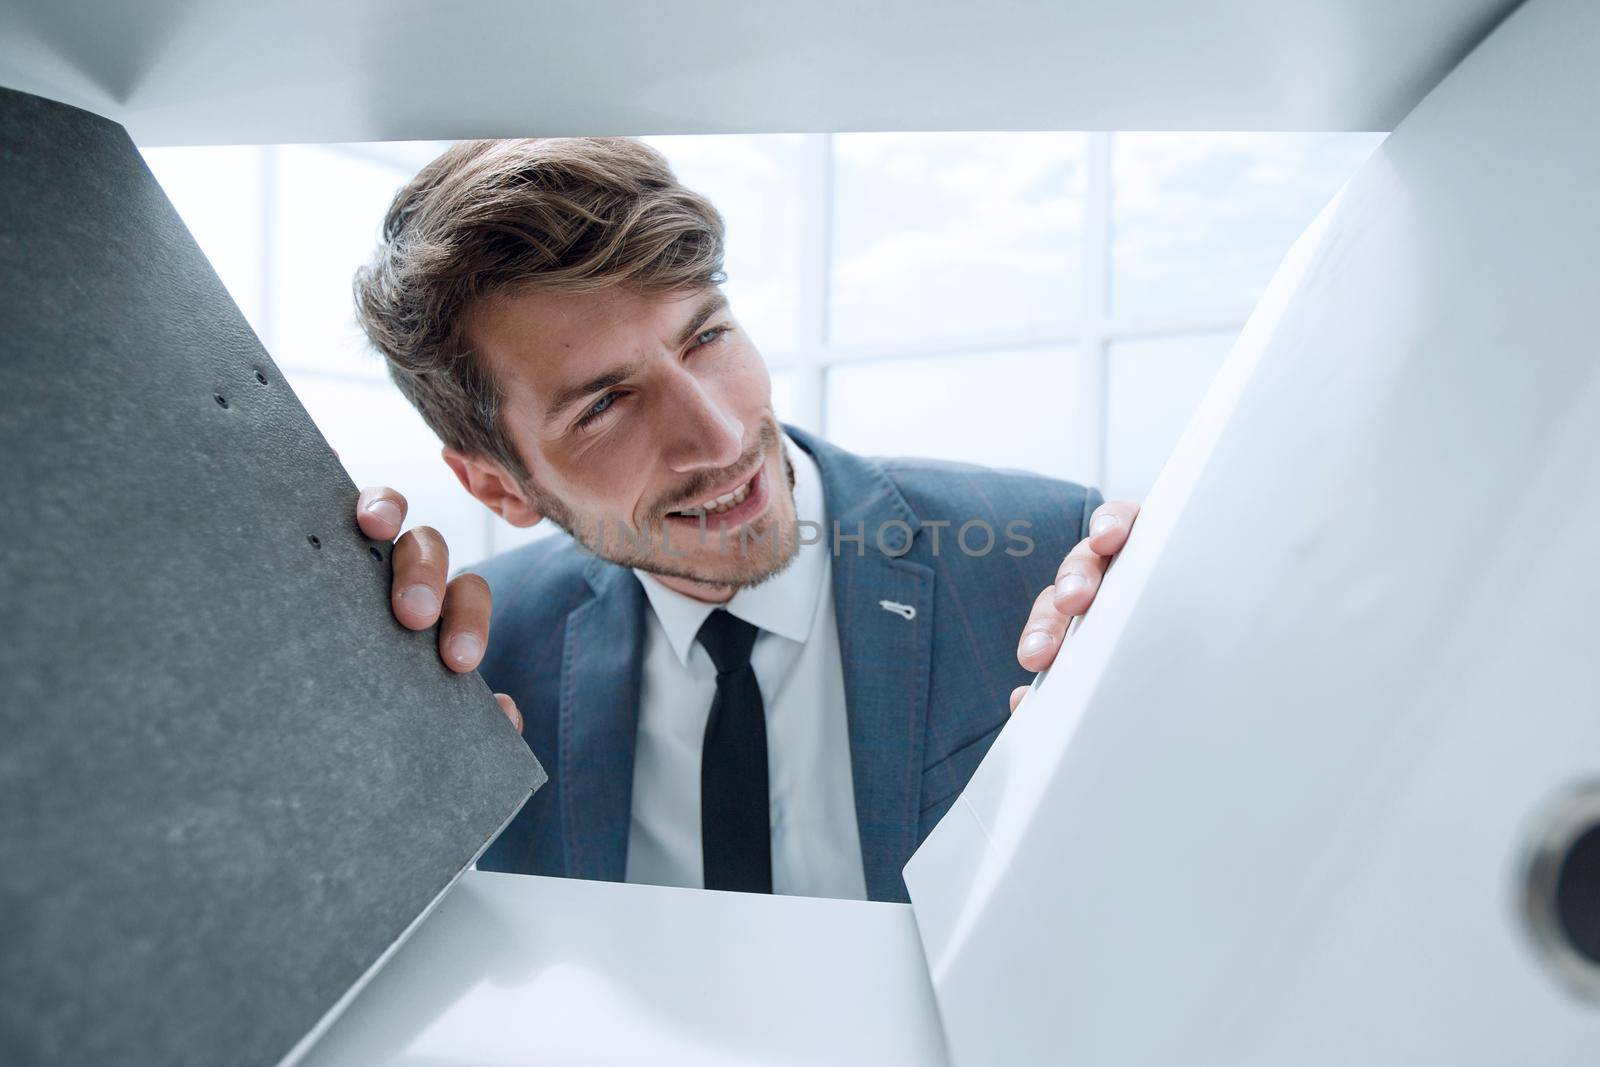 pensive man looks at documents in a closet in the office